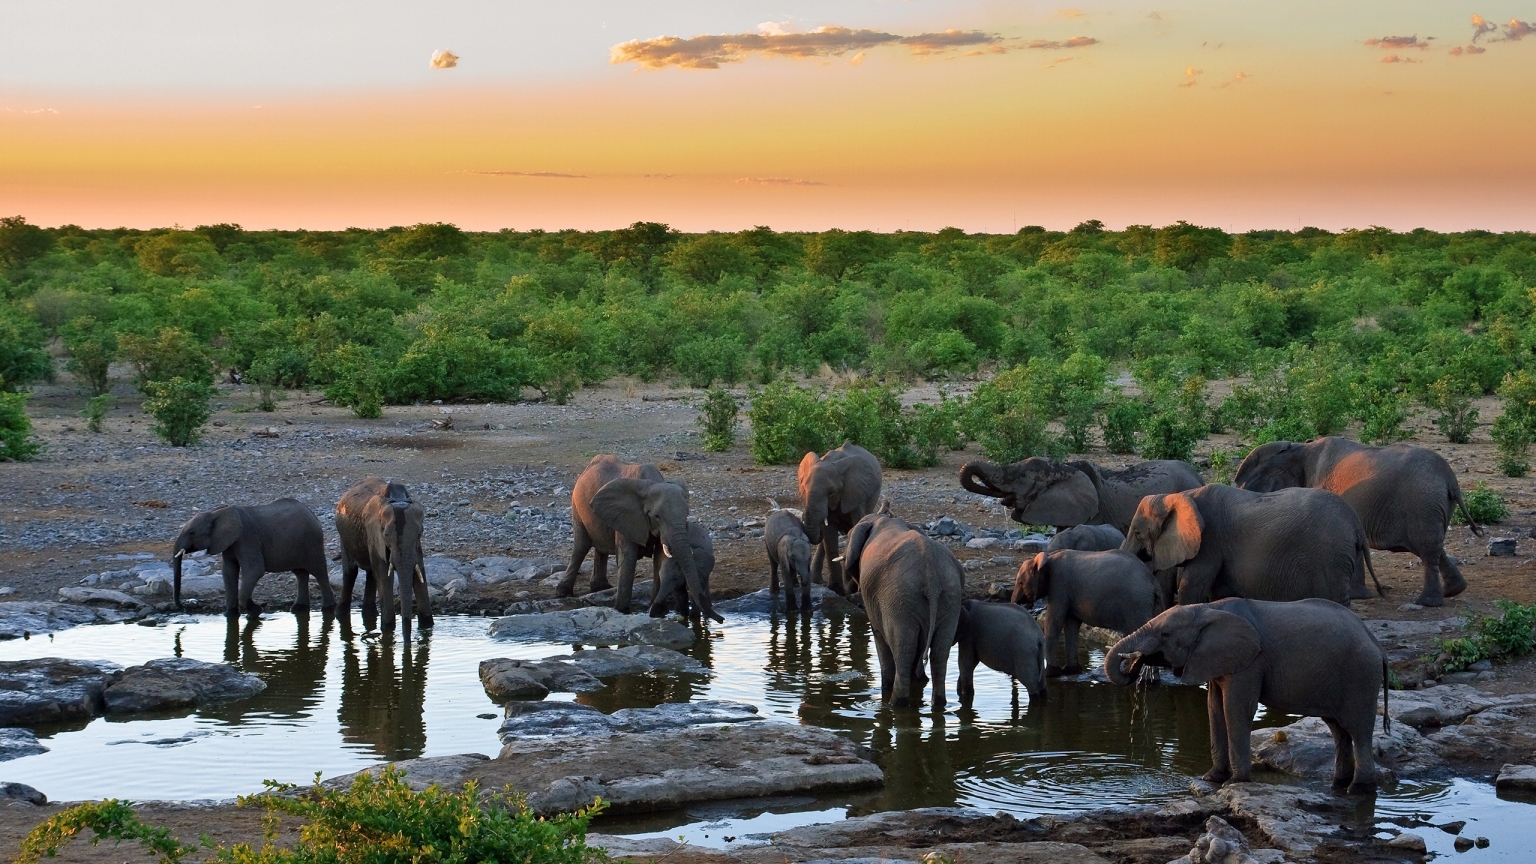 Sunset with Elephants for 1536 x 864 HDTV resolution